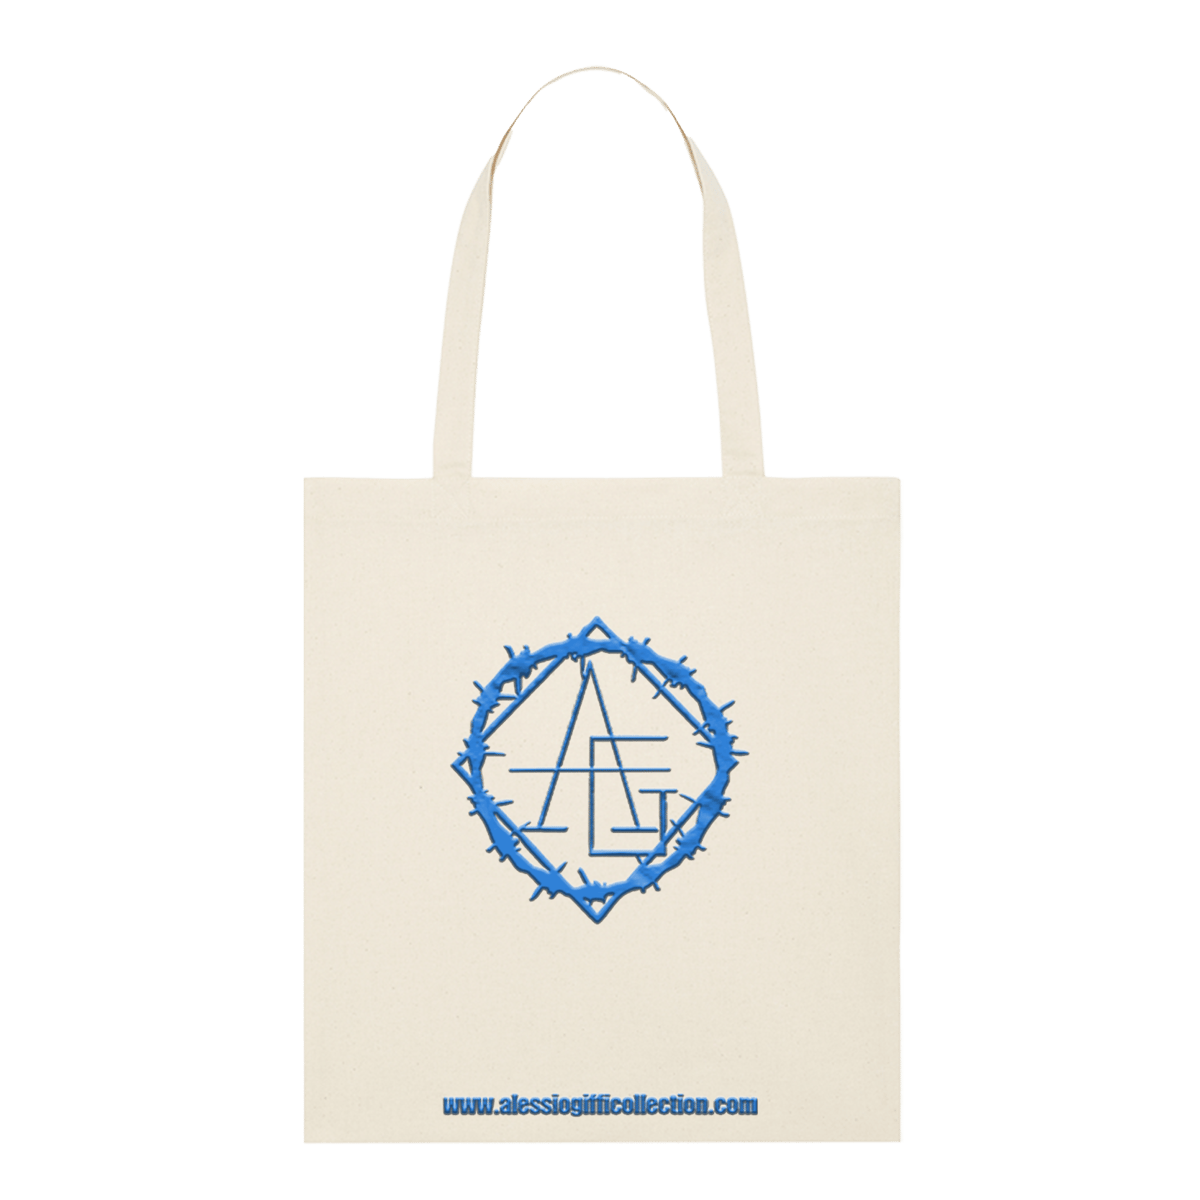 Image of TOTEBAG ROYAL BLUE - for important things only